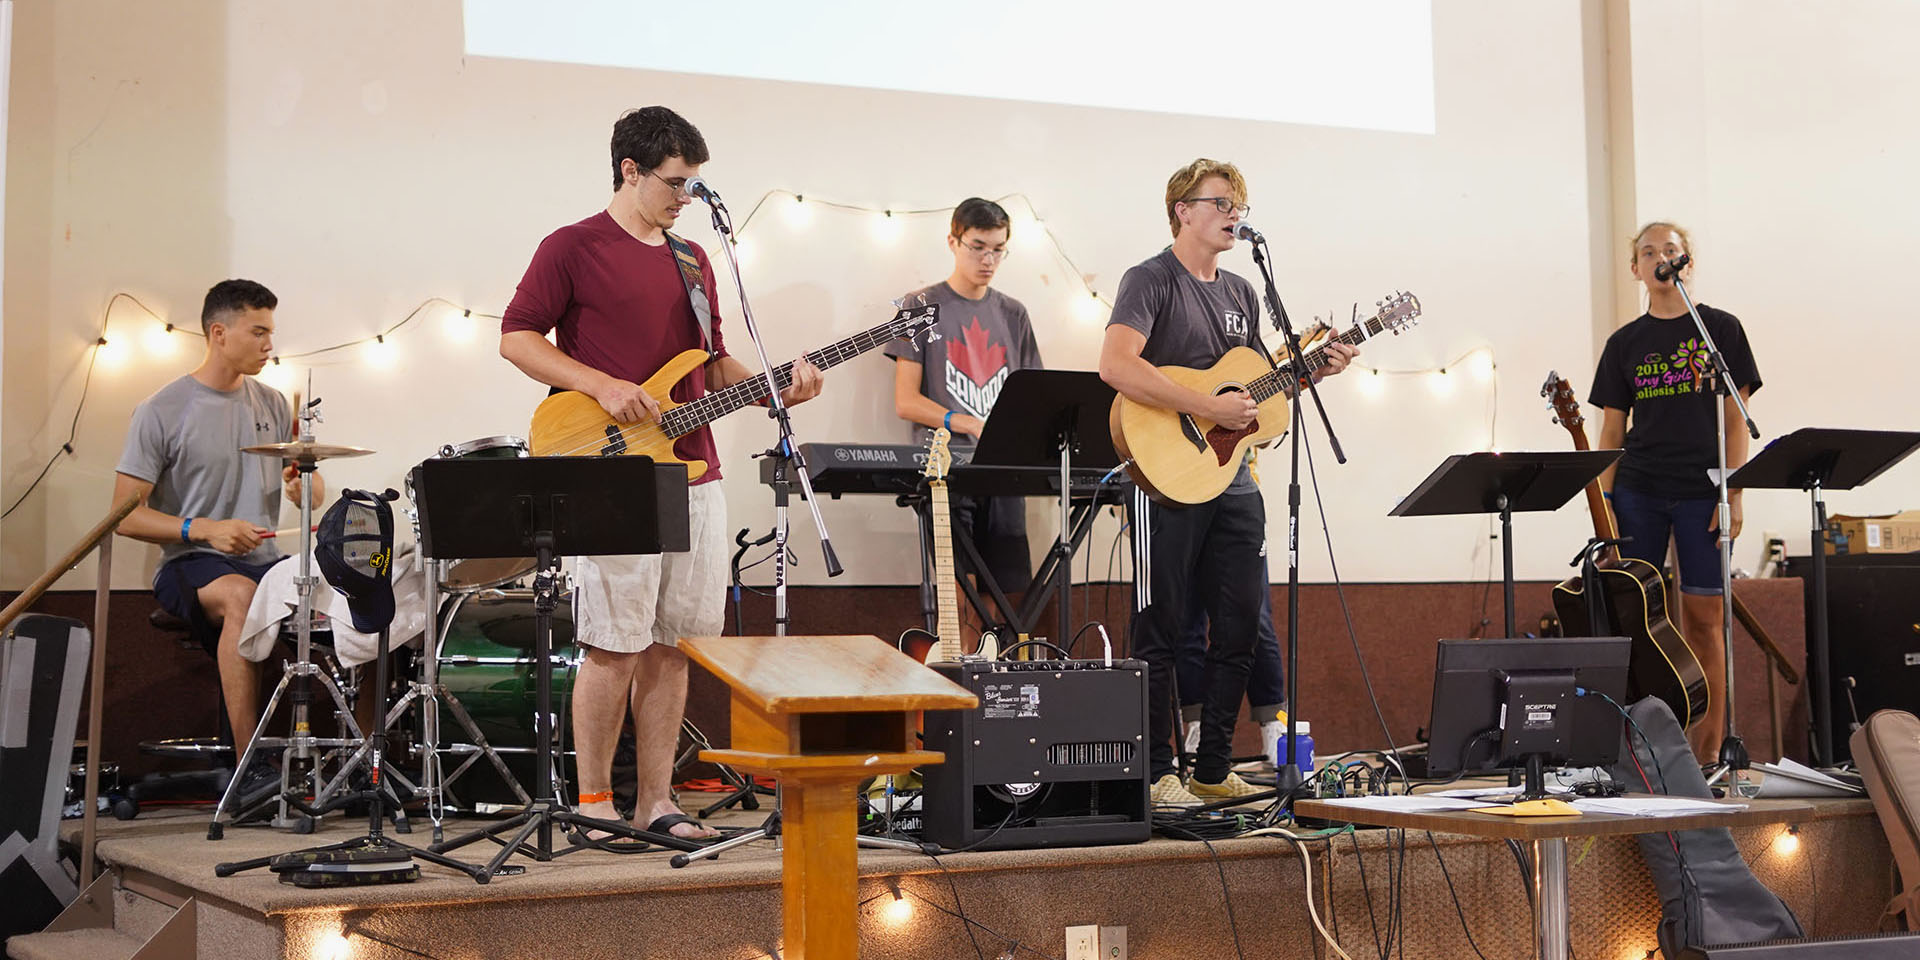 The camp worship band performs on stage.